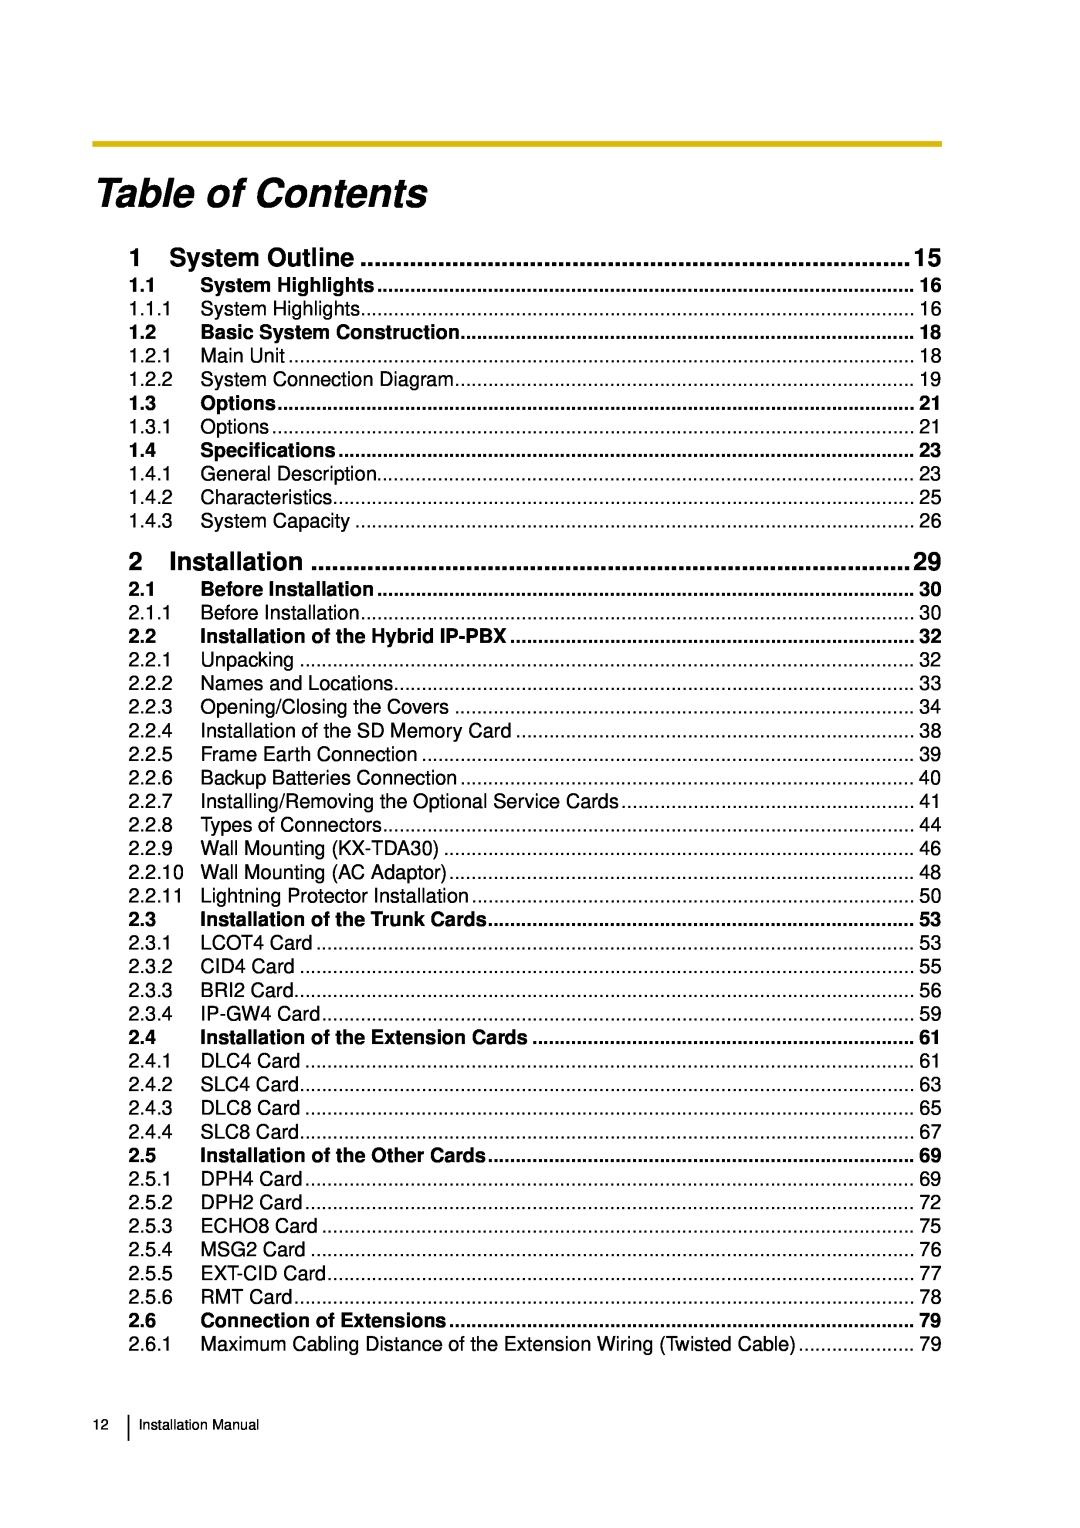 Panasonic KX-TDA30 installation manual Table of Contents, System Outline, Installation 